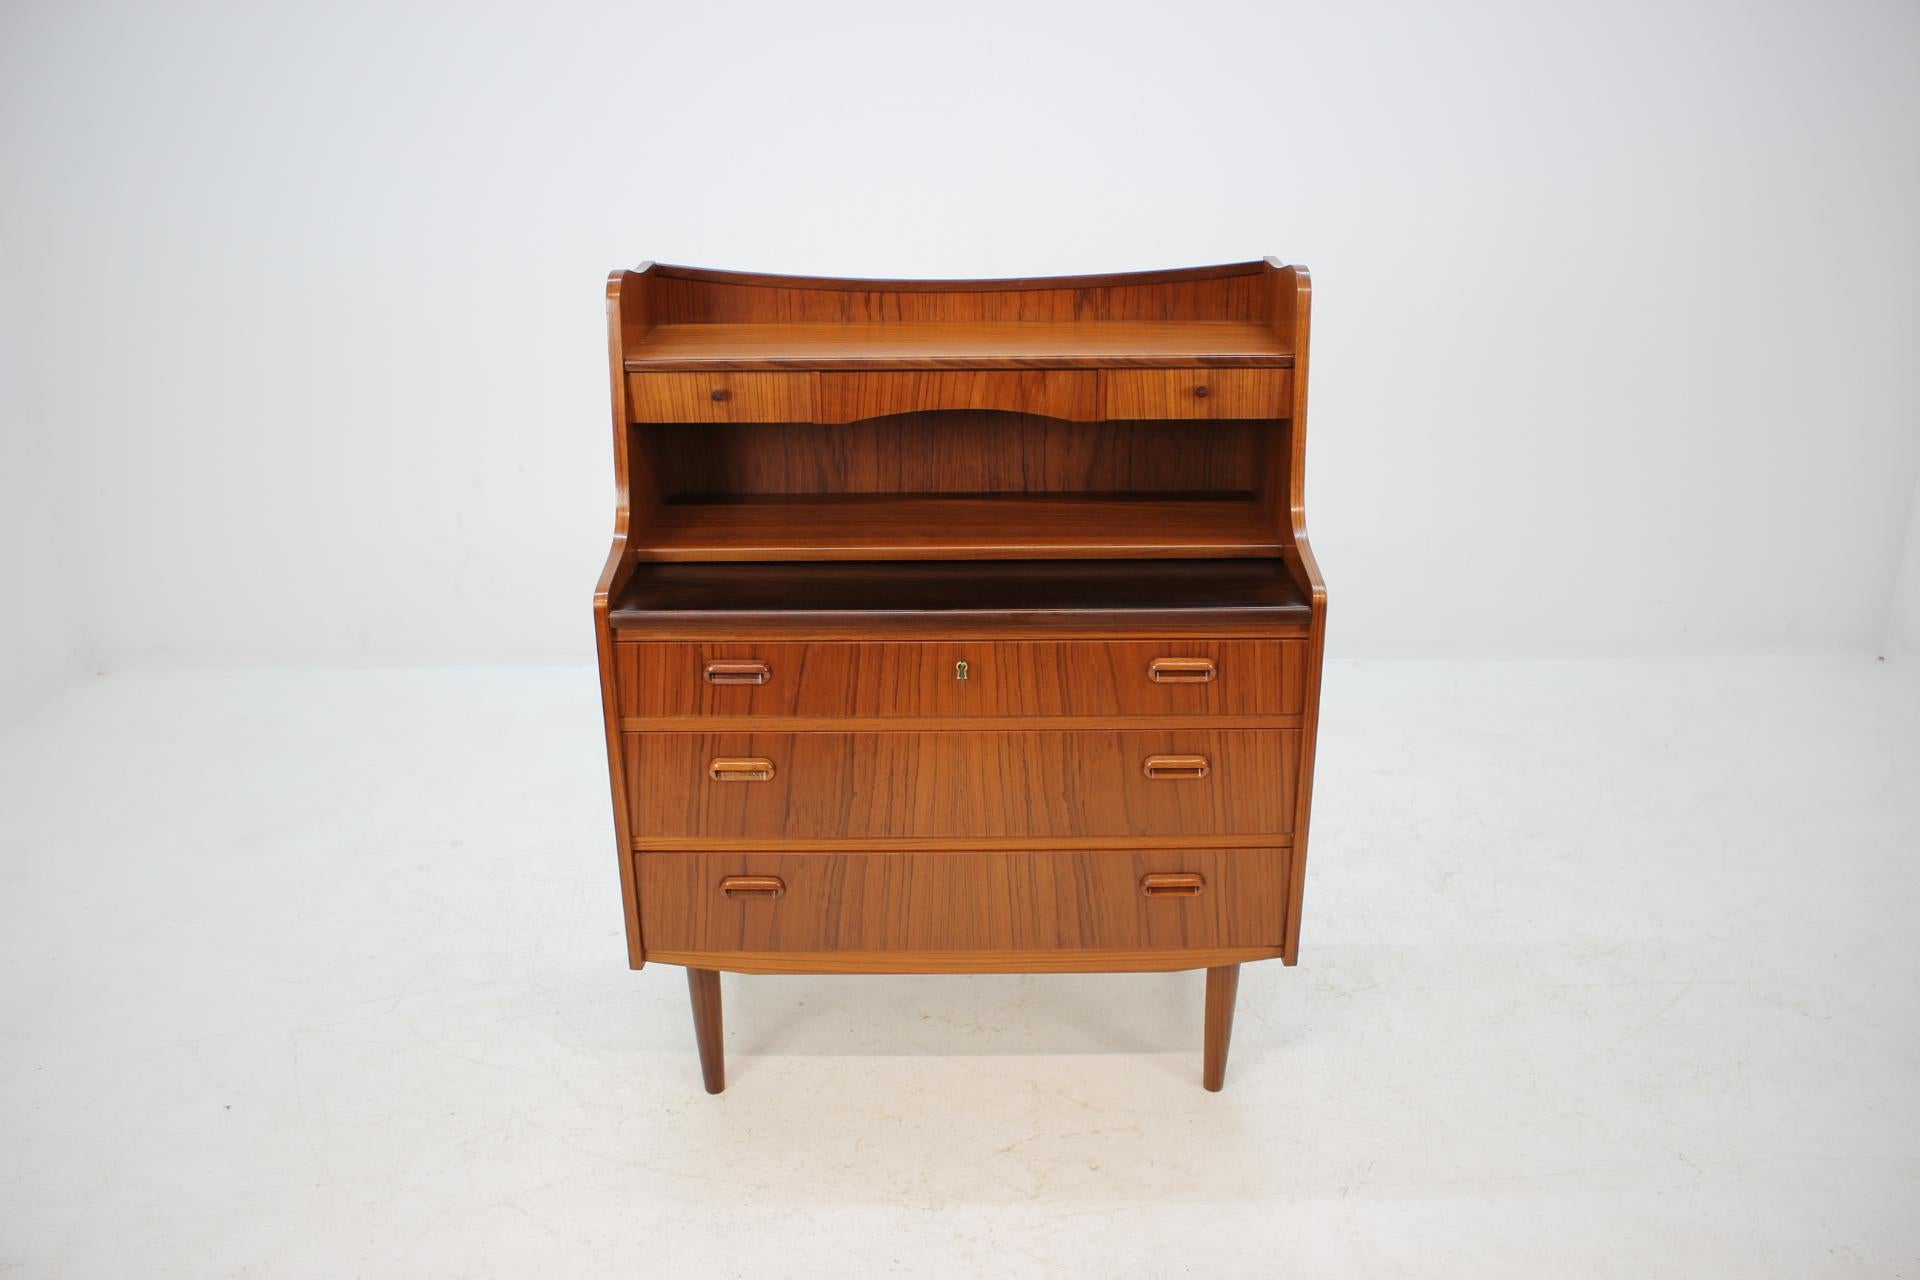 This Danish teak writing cabinet features three drawers and two small one. The extendable writing area desk can be extended up to 60 cm. This item was carefully refurbished.